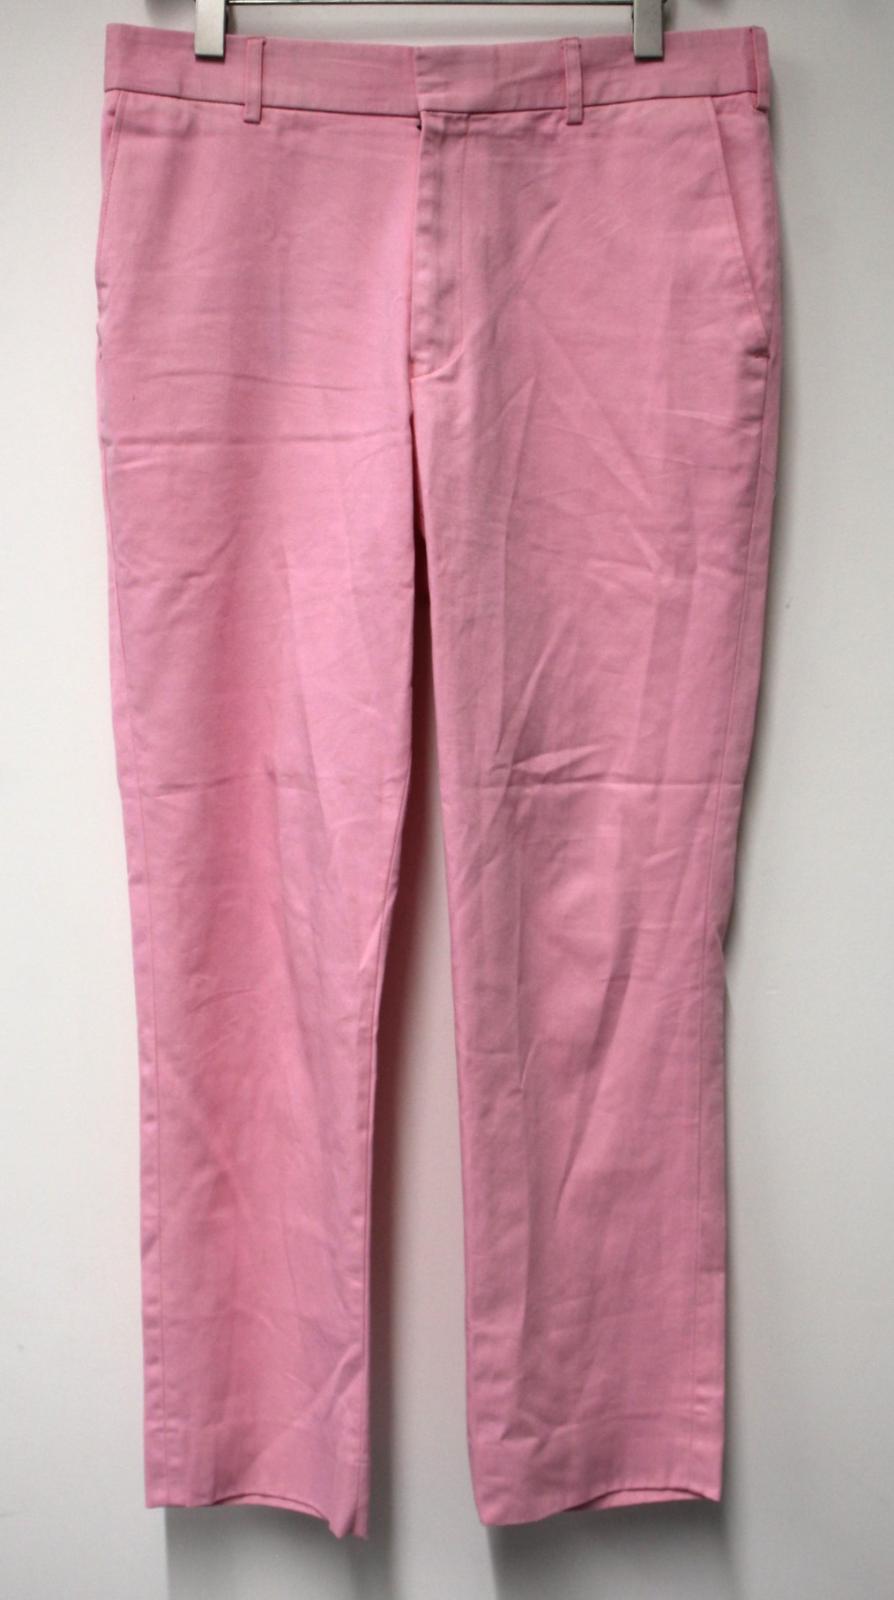 CORDINGS Men's Pink Cotton Regular Fit Chino Trousers W36 L31 RRP110 NEW